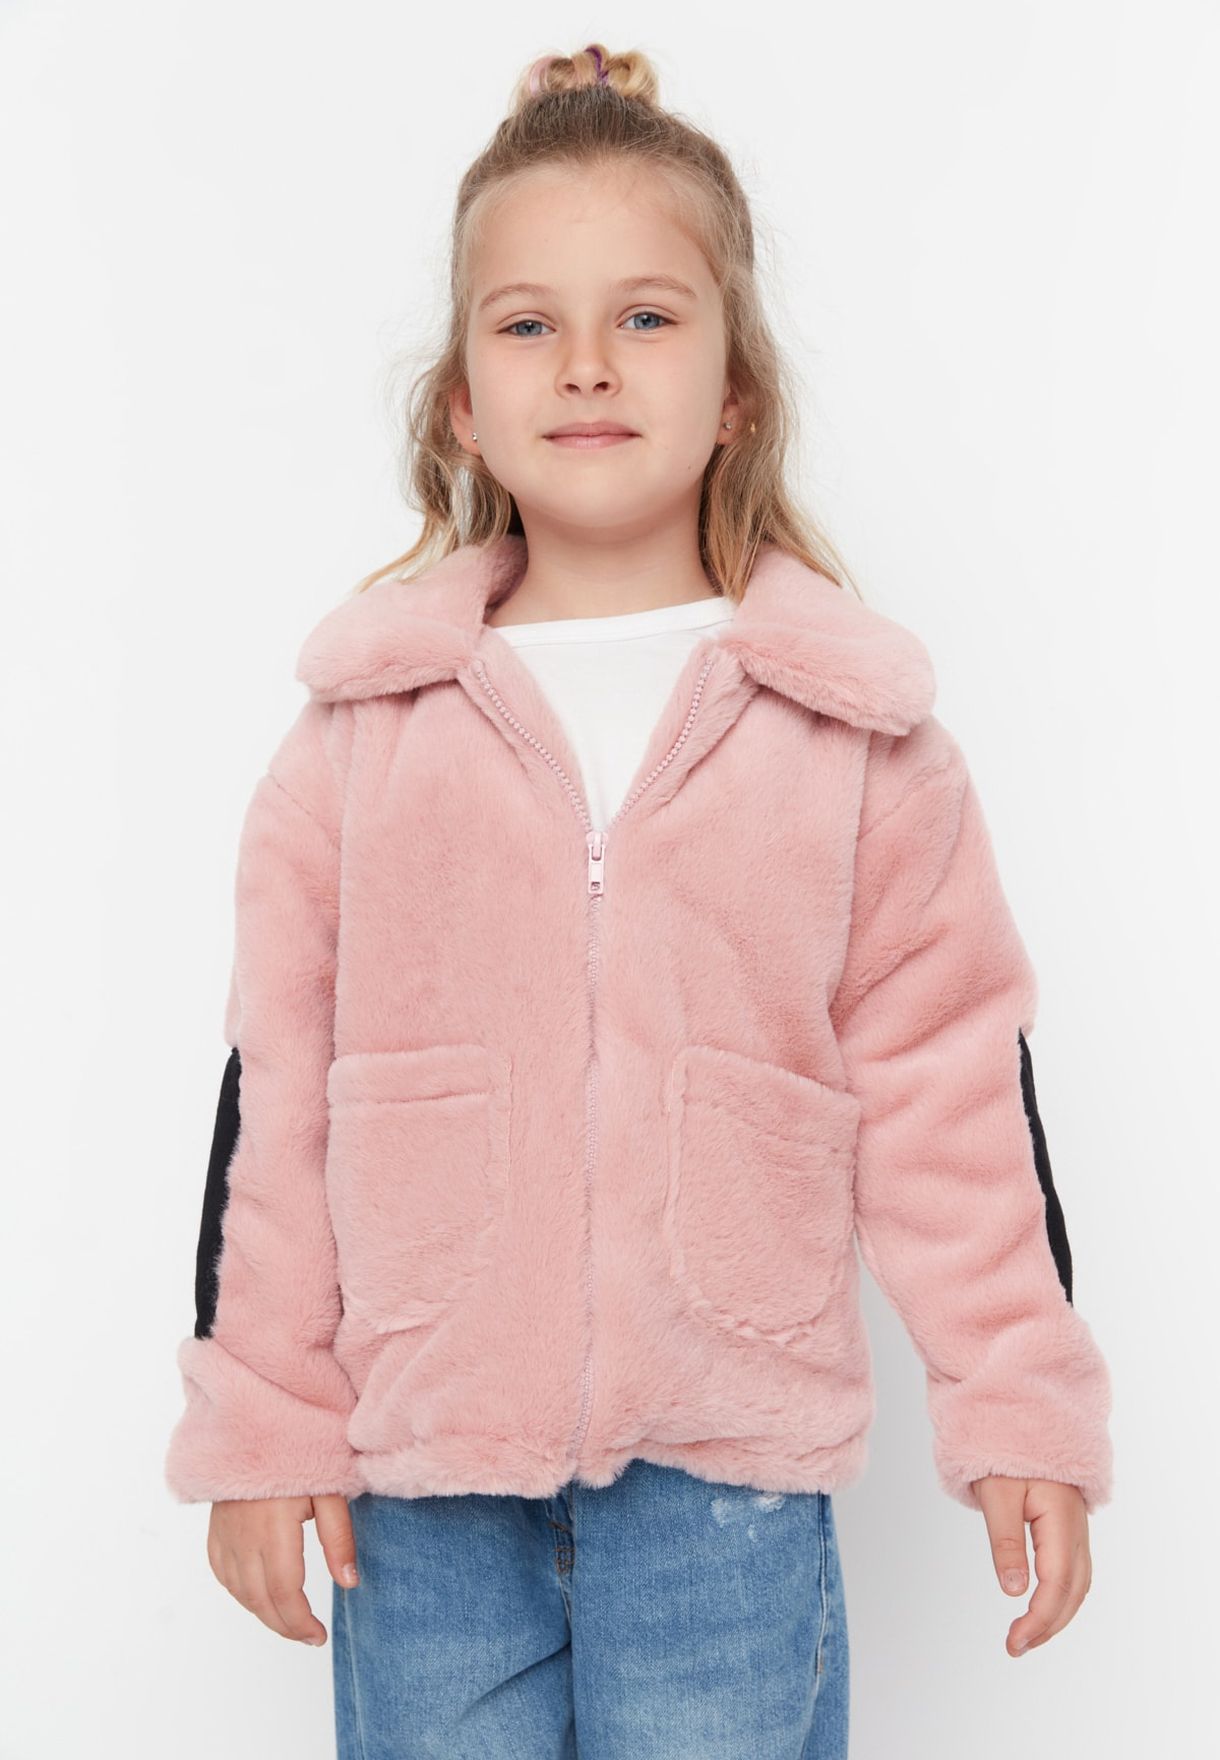 Kids Patch Embroidered Jacket